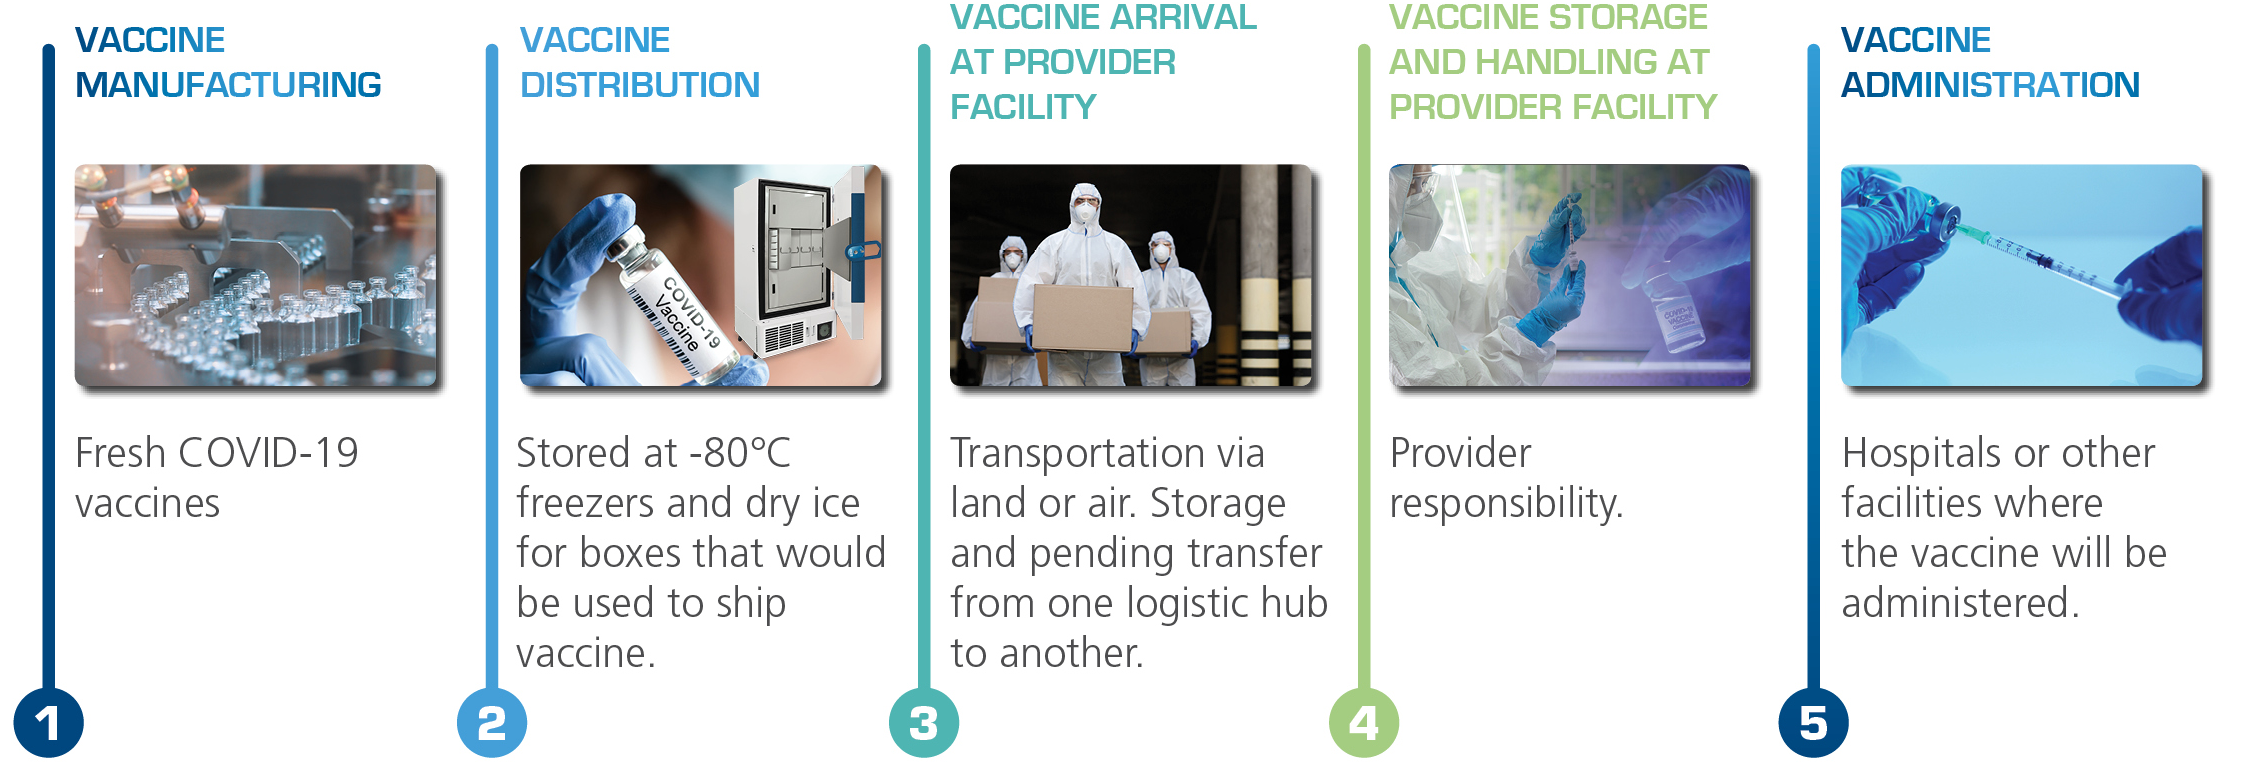 How vaccines are shipped at -80°C. Source: CDC on Vaccine Storage and Handling